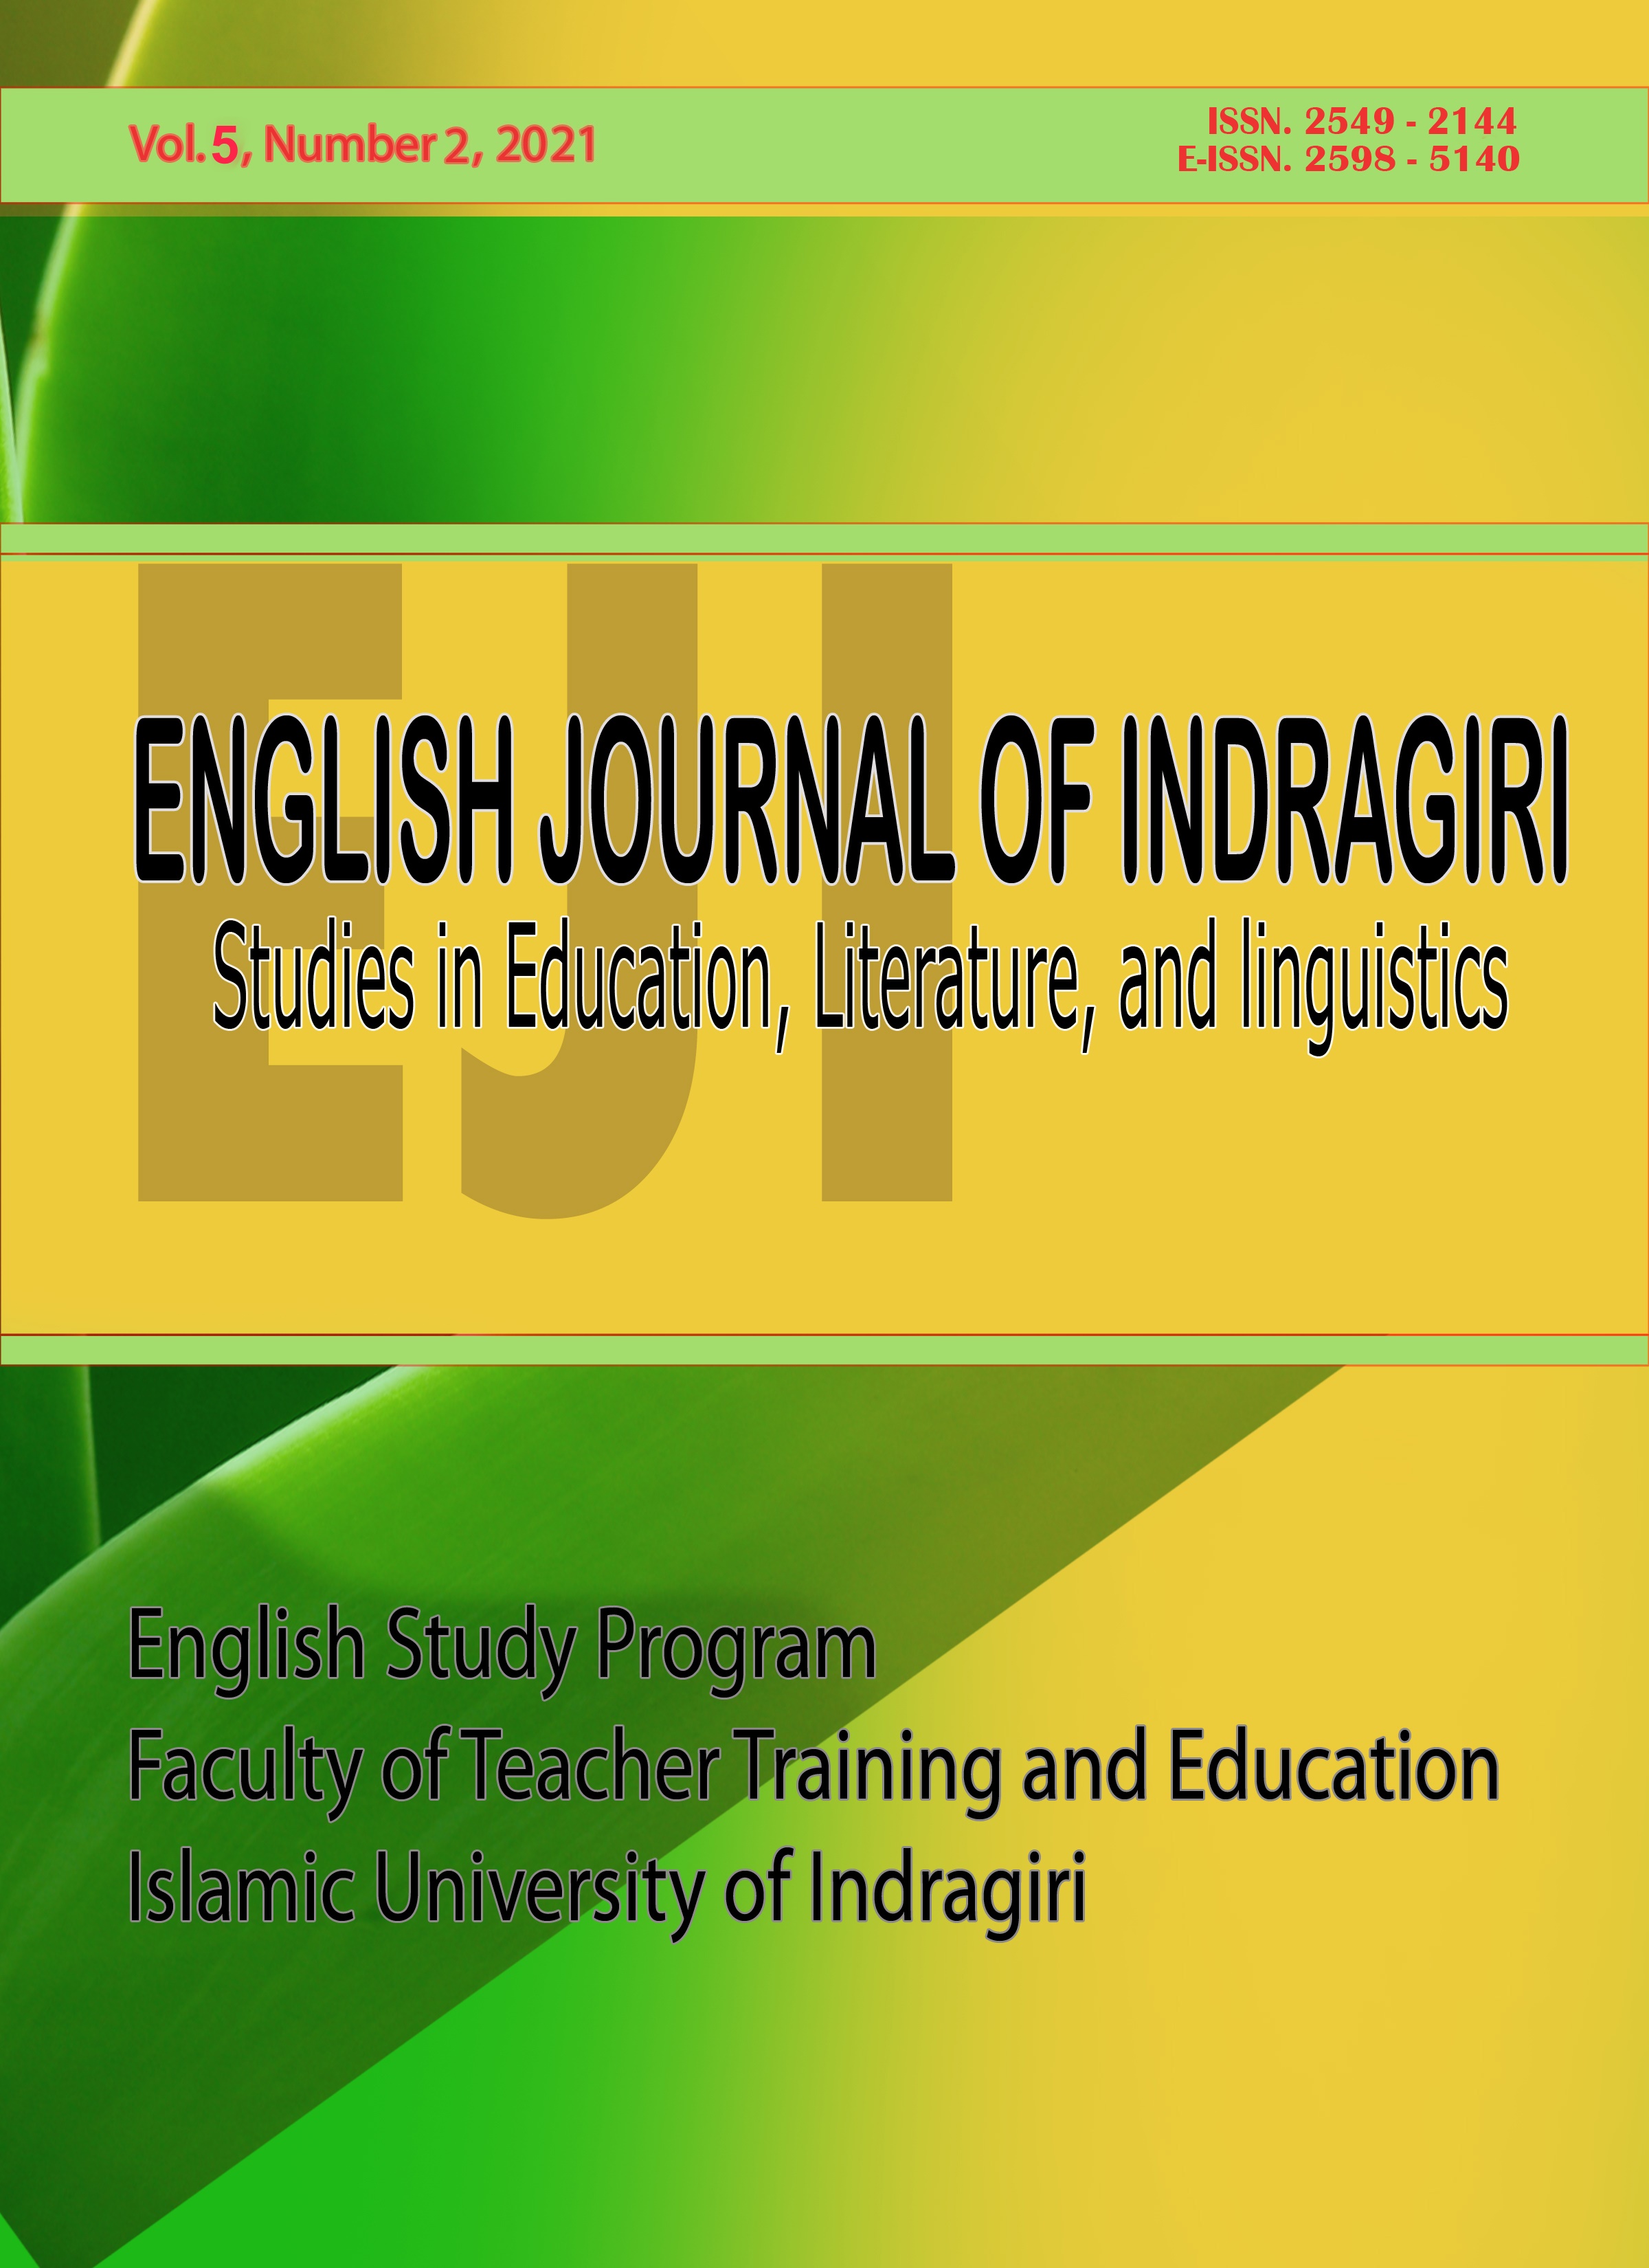 					View Vol. 5 No. 2 (2021): EJI (English Journal of Indragiri): Studies in Education, Literature, and Linguistics
				